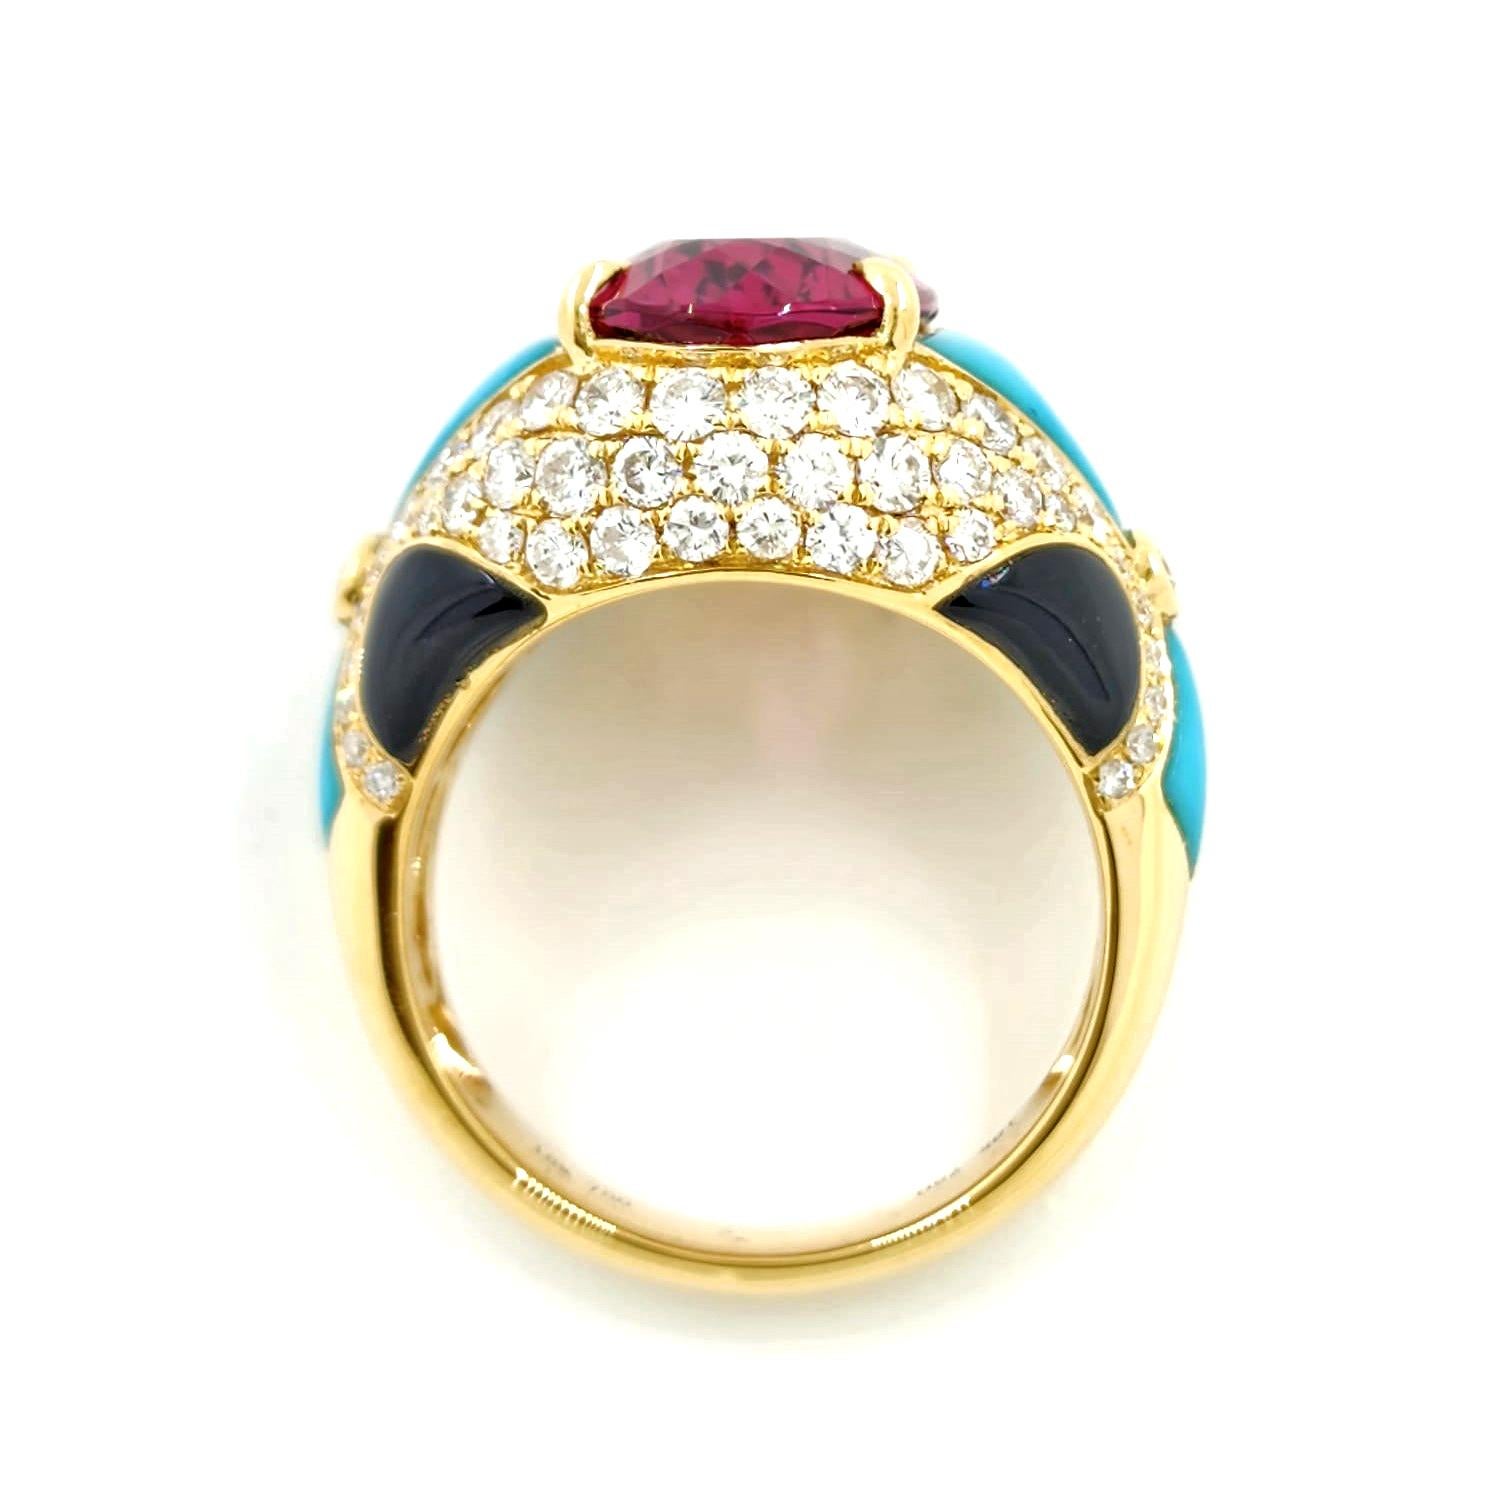 Art Deco Rubellite Turquoise Onyx Diamond Cocktail Ring in 18 Karat Yellow Gold For Sale 1